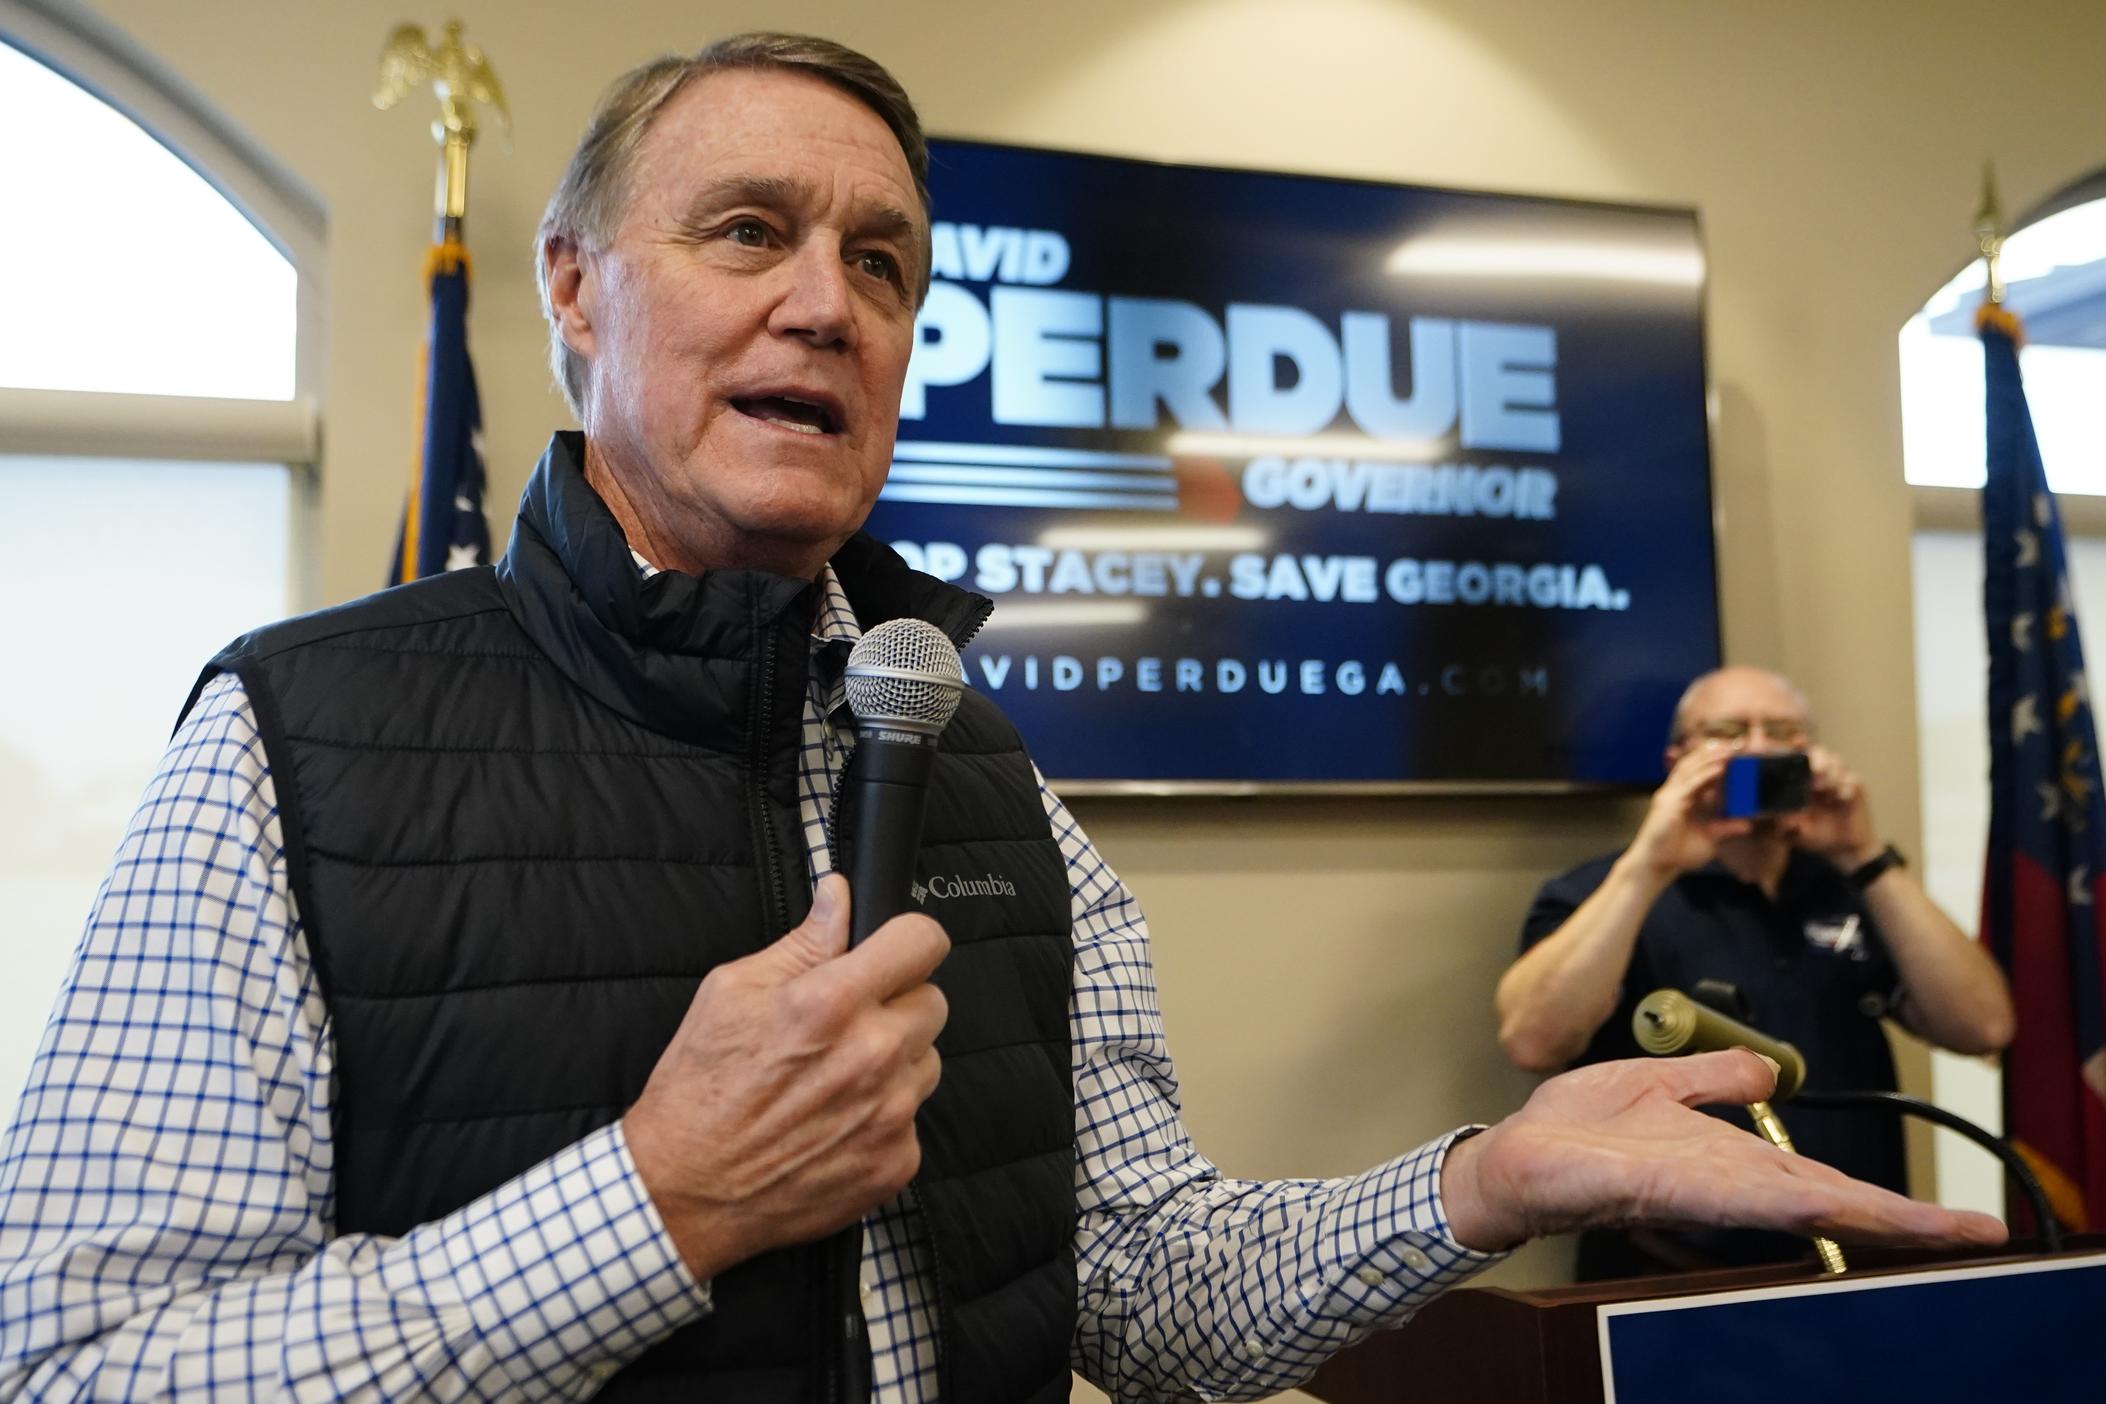  Former Sen. David Perdue, a Republican candidate for governor of Georgia, arrives to speaks at a campaign stop at the Covington airport Wednesday, Feb. 2, 2022, in Covington, Ga.